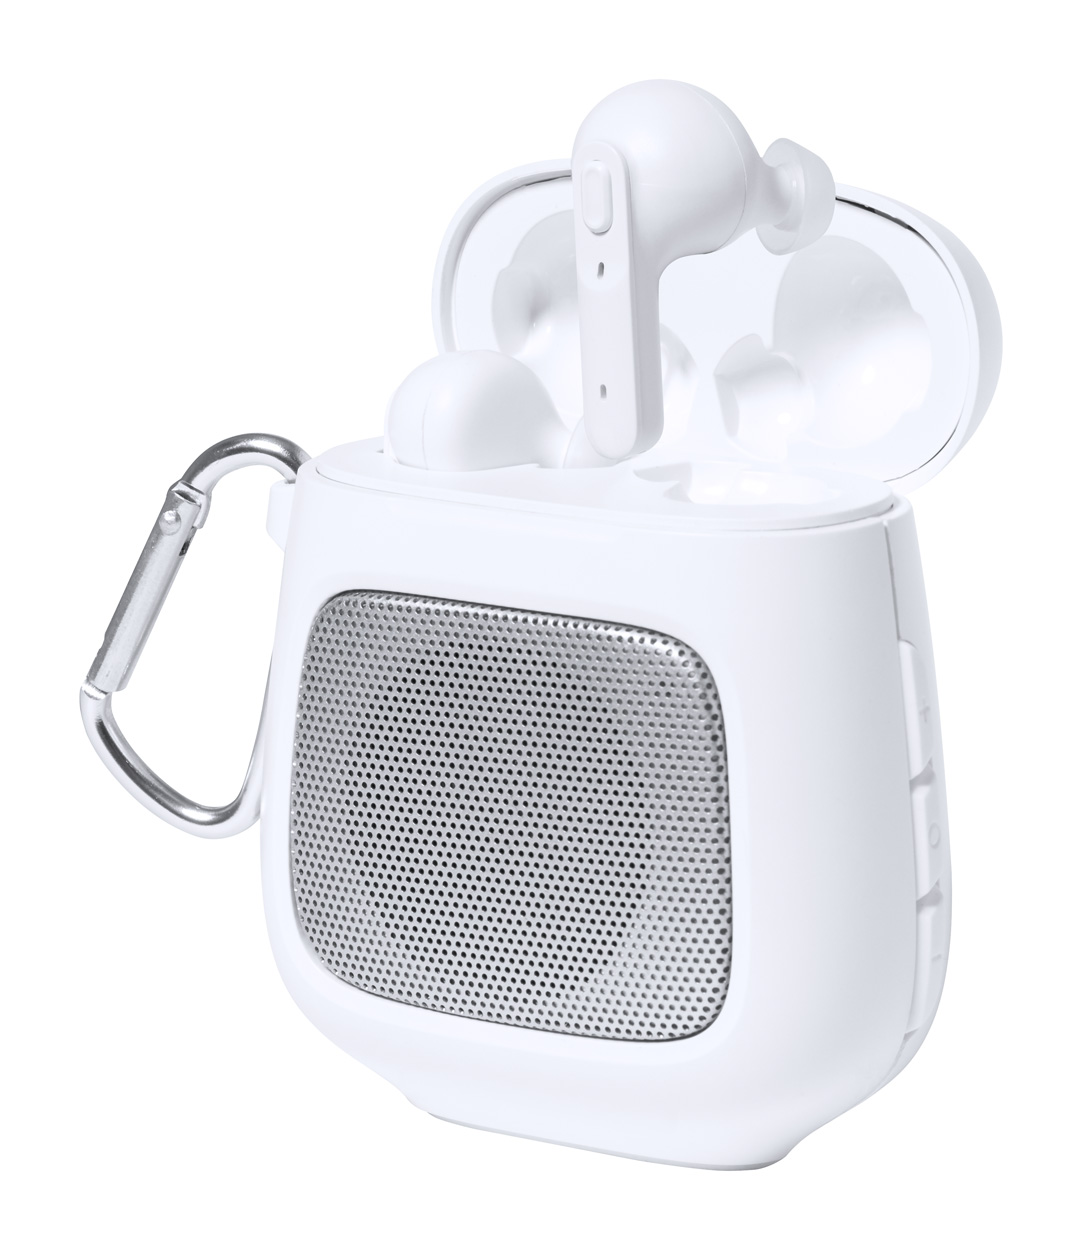 Bluetooth speaker boxes with headphones - white